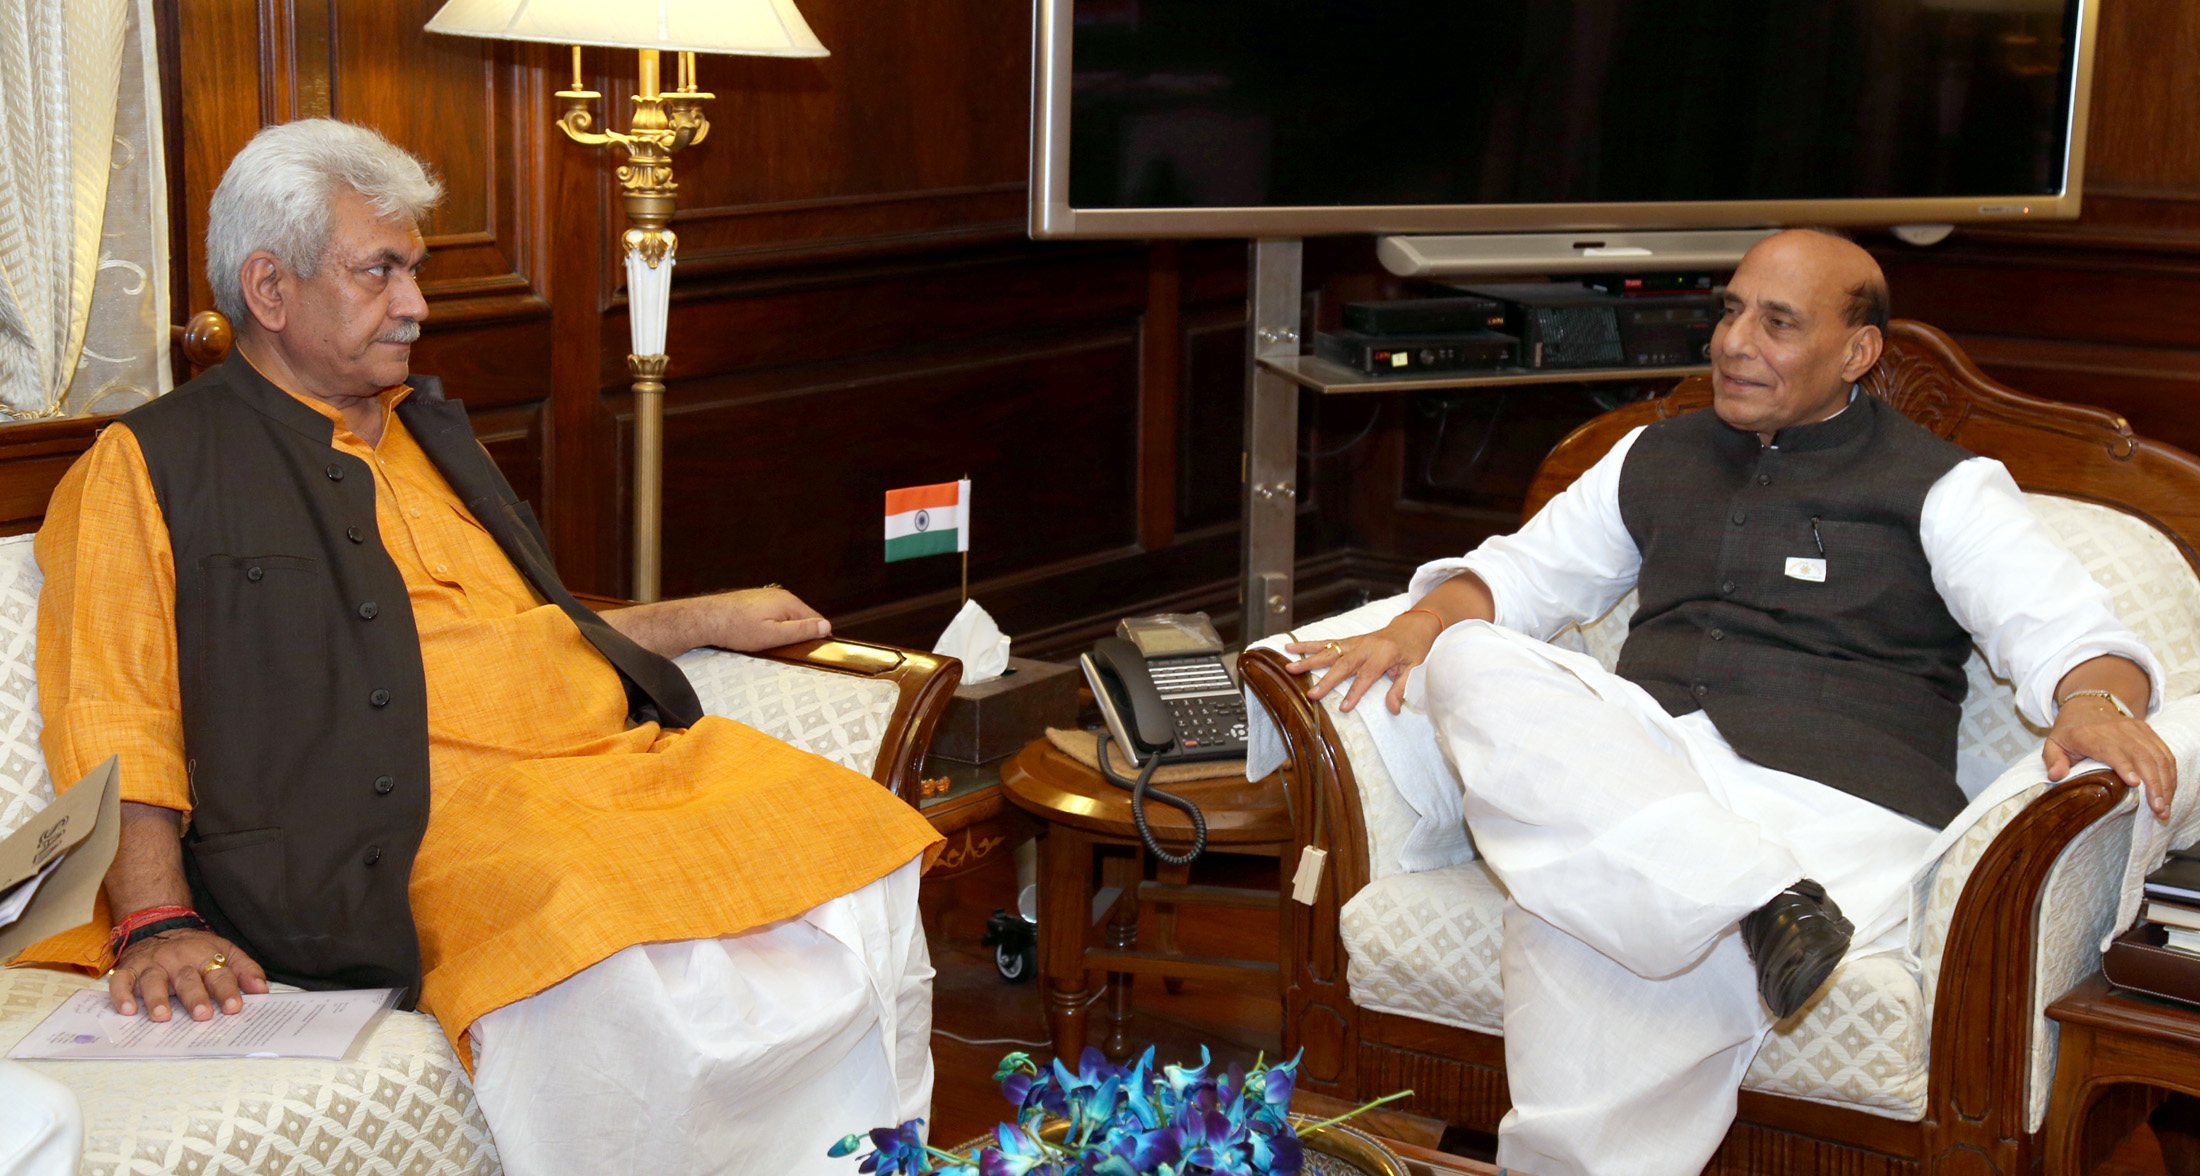 The Minister of State for Communications (Independent Charge) and Railways, Shri Manoj Sinha calling on the Union Home Minister, Shri Rajnath Singh, in New Delhi on November 24, 2016.